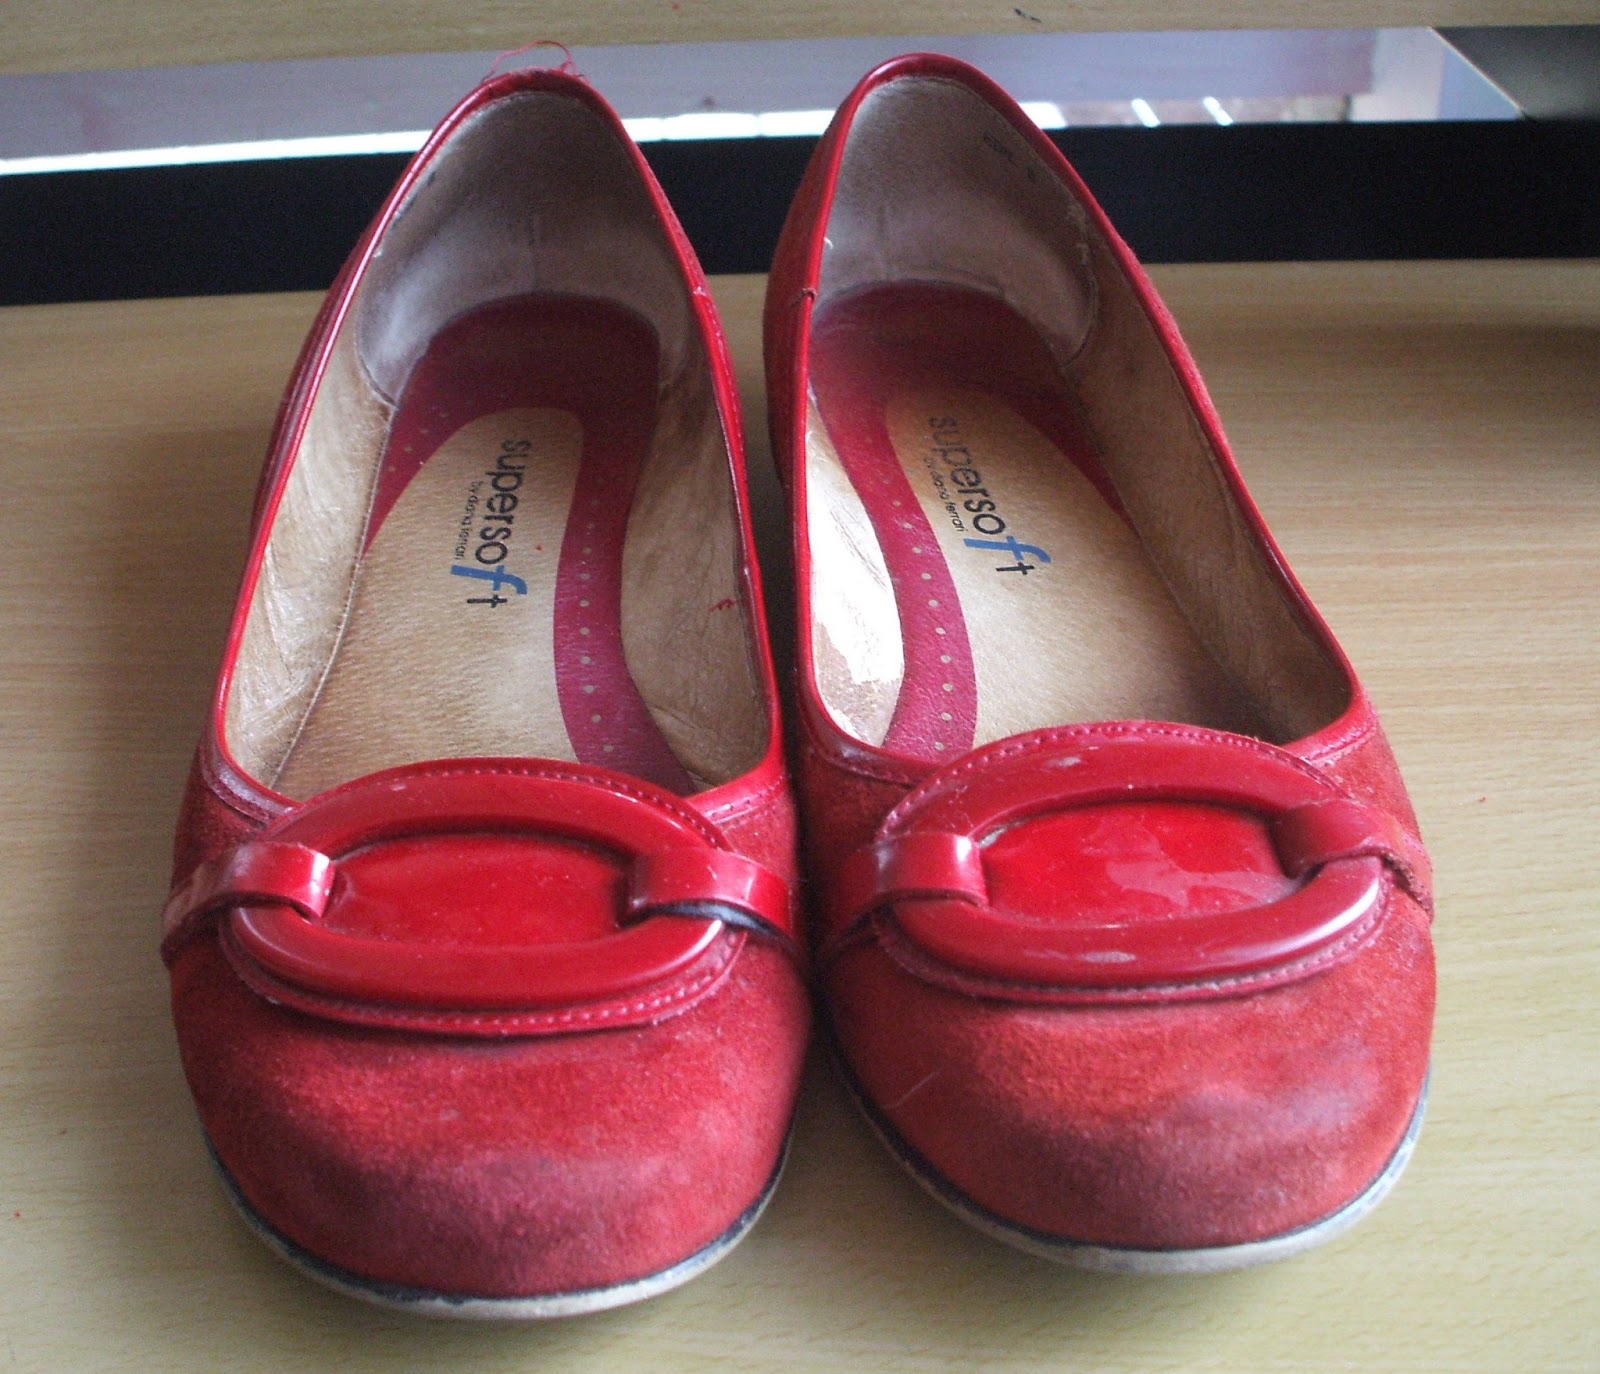 Refashion Coop Cherry Blossom Shoes.